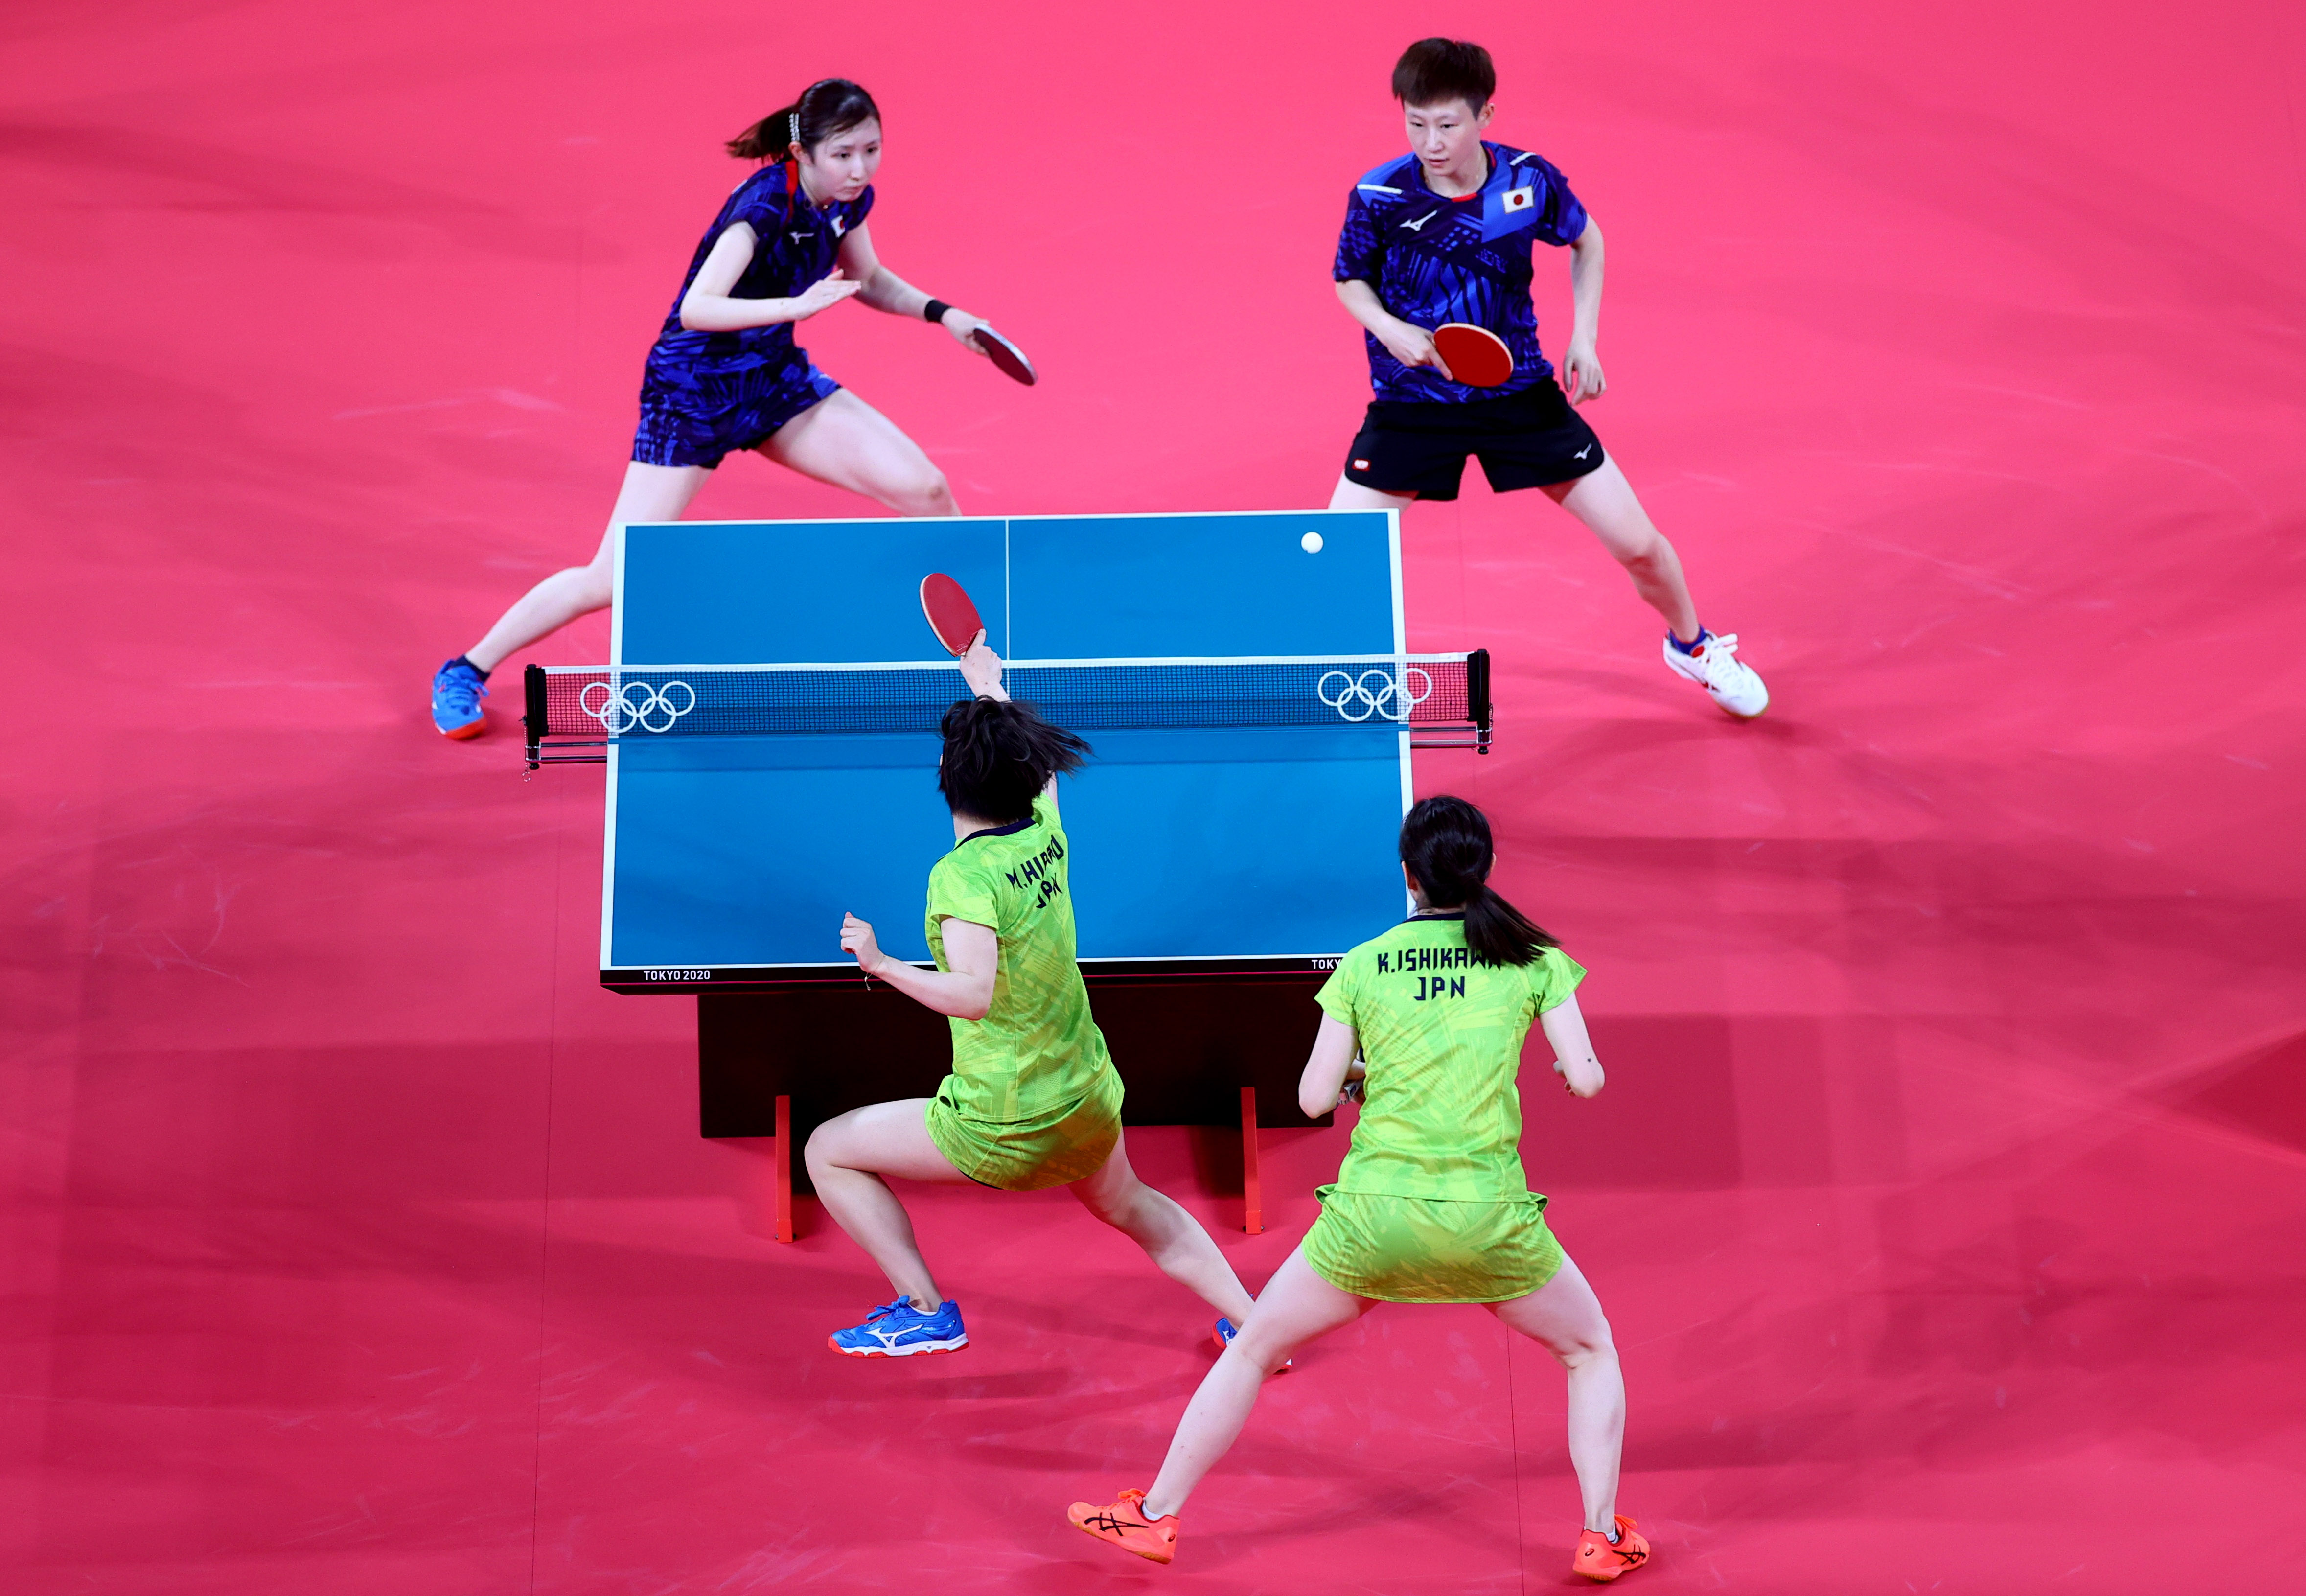 is table tennis an Olympic sport?